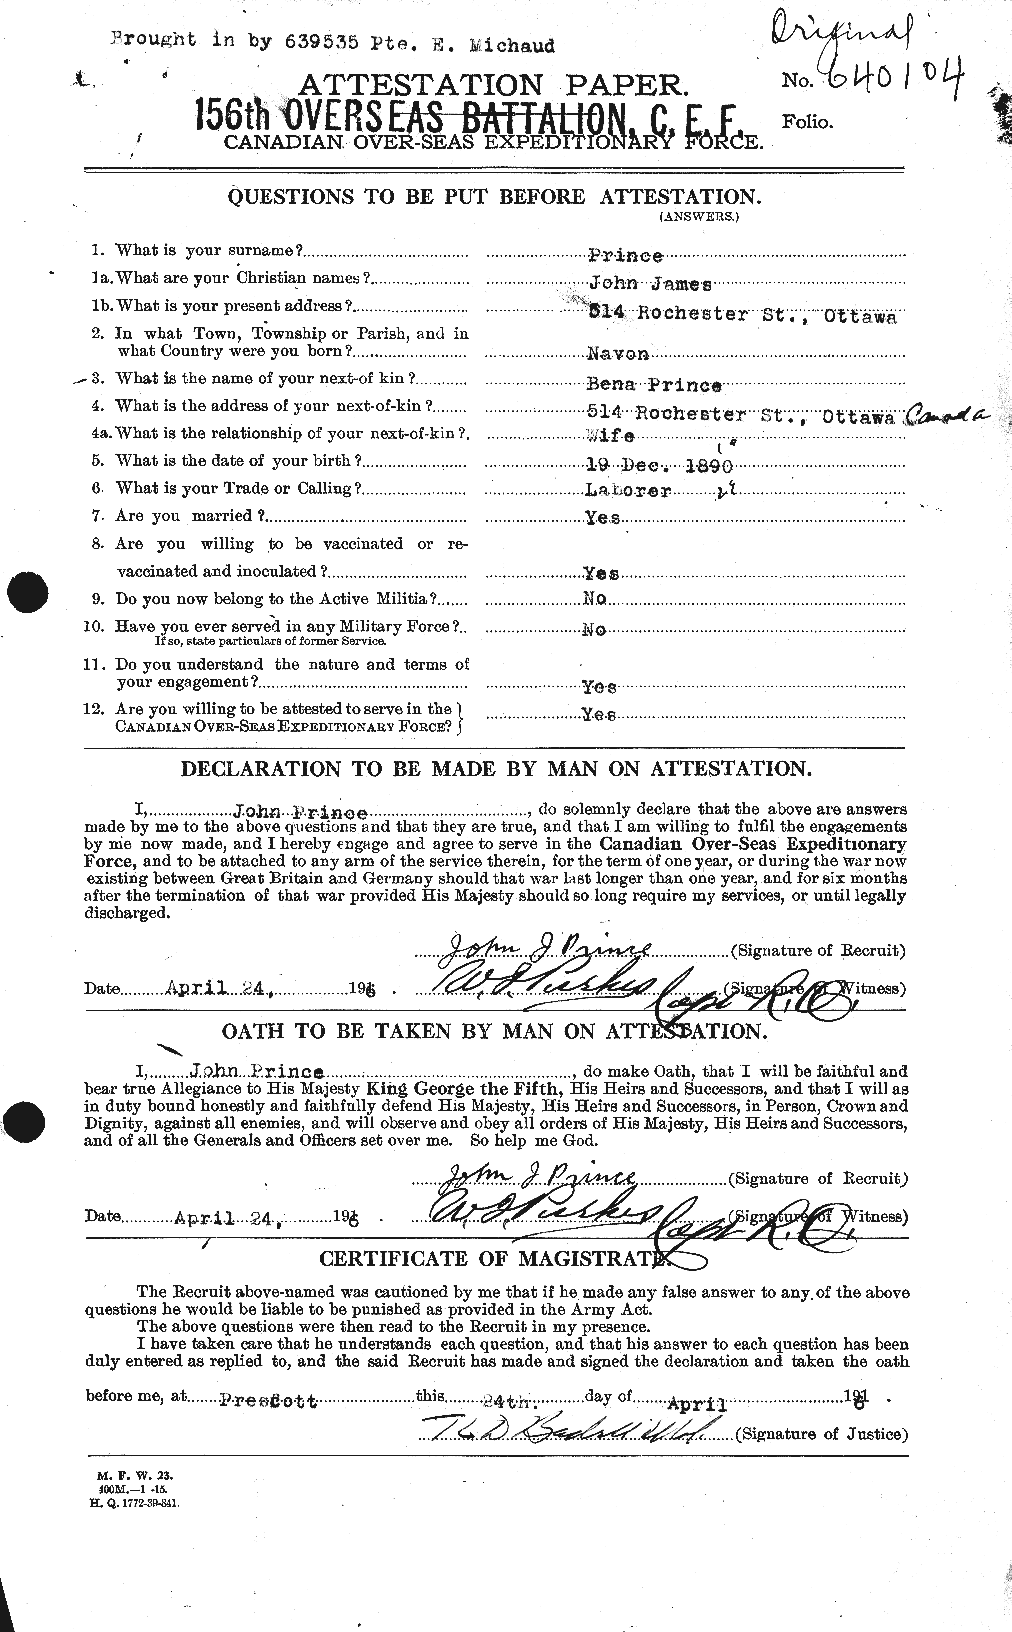 Personnel Records of the First World War - CEF 586228a